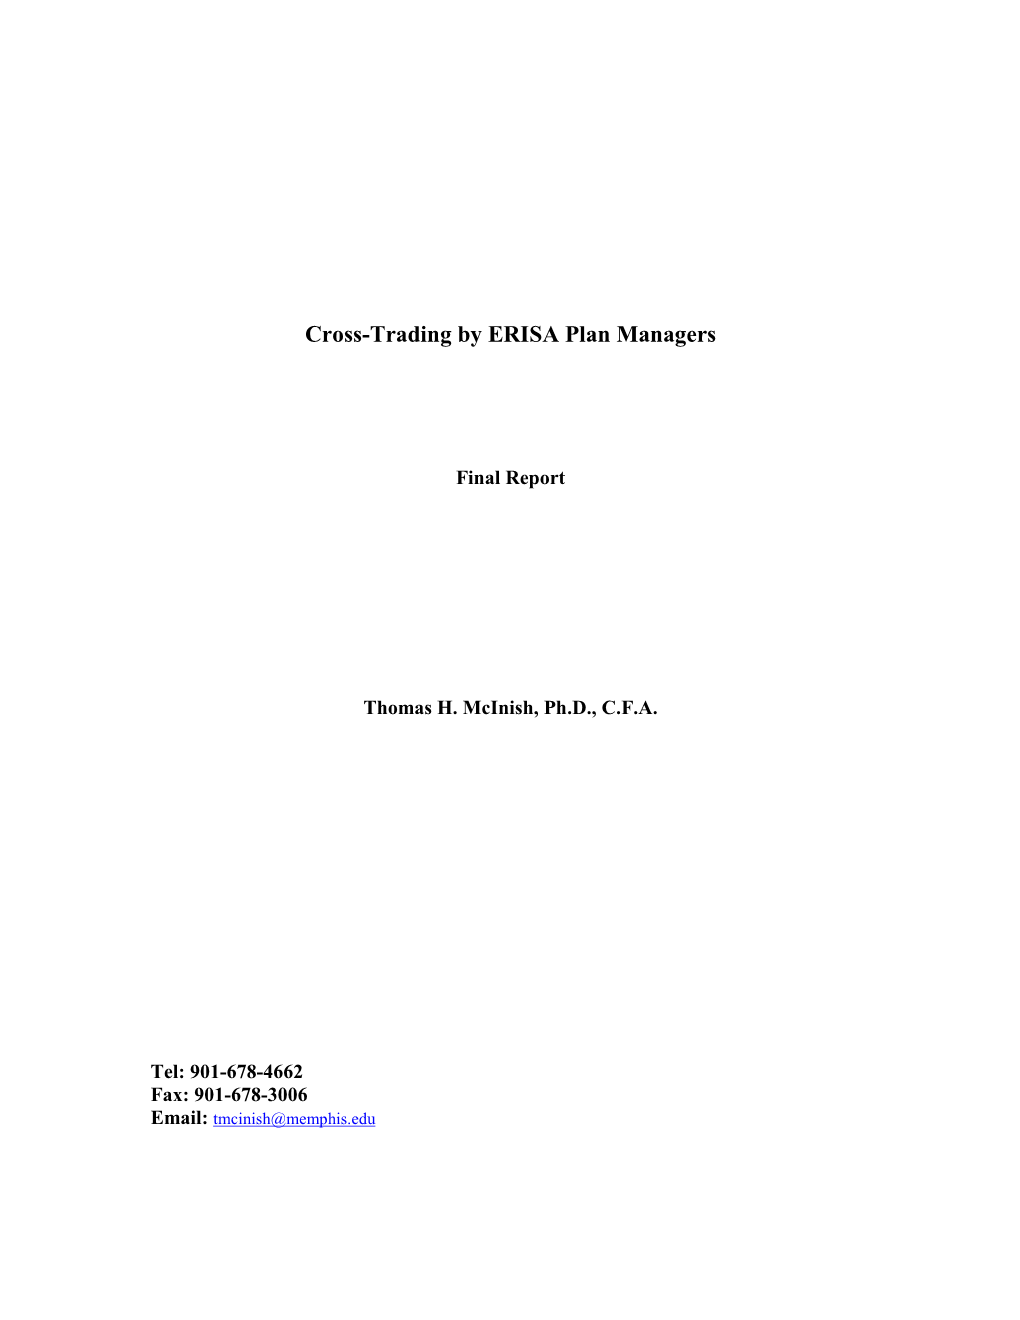 Cross-Trading by ERISA Plan Managers